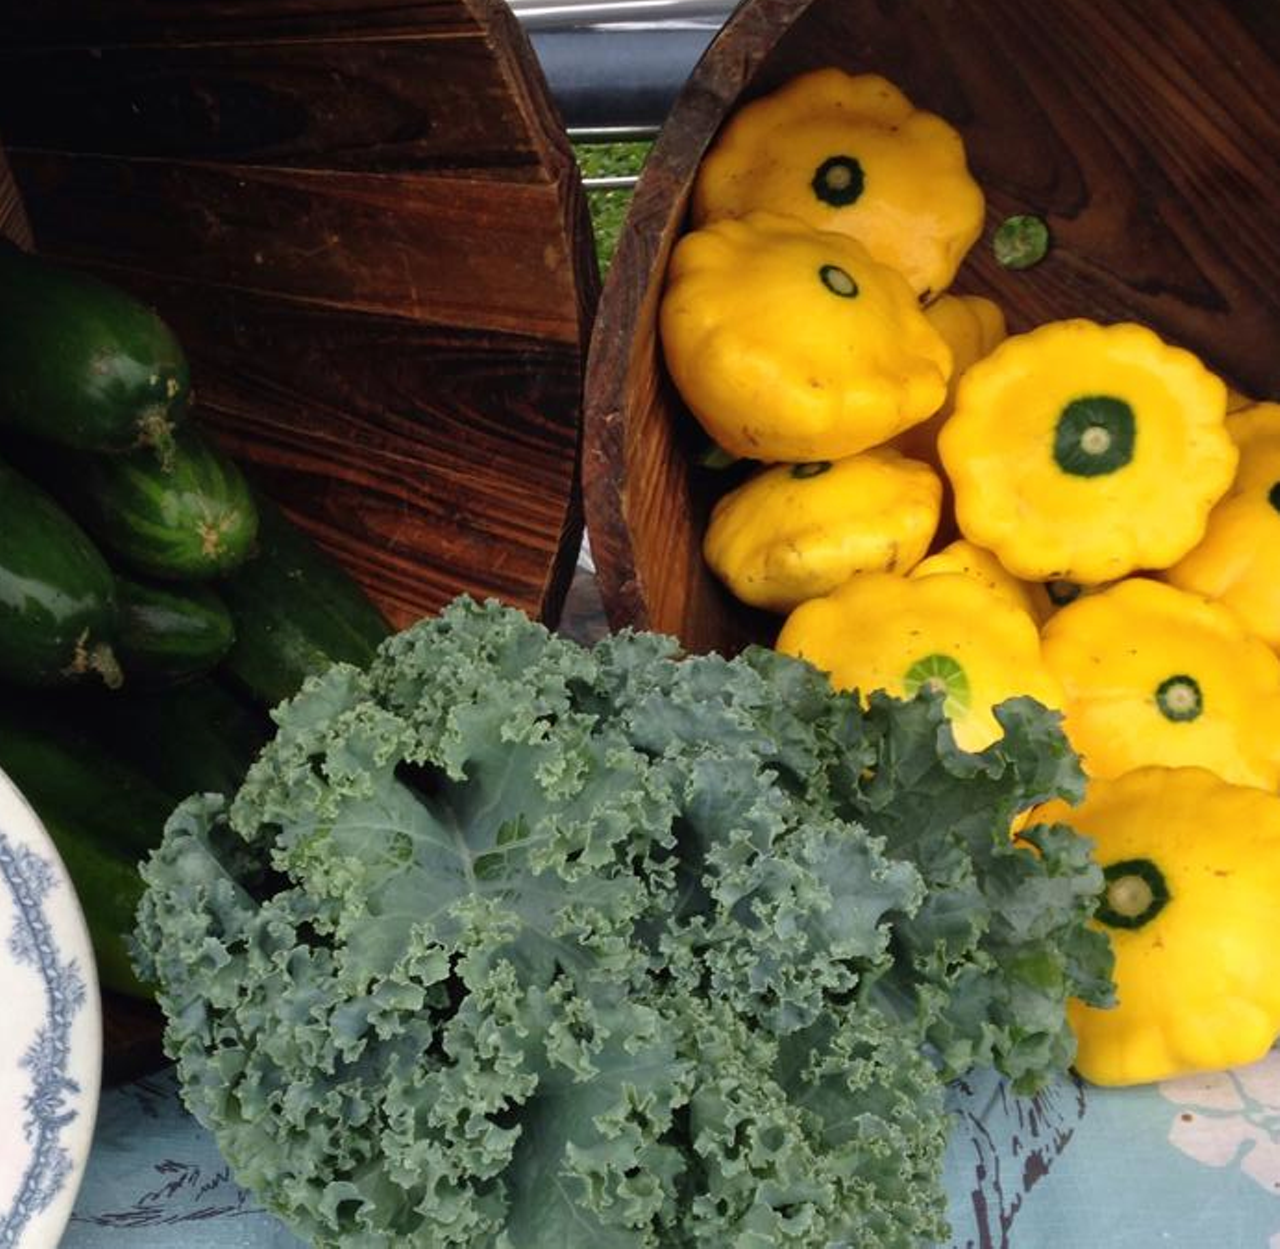 Canal Corners Farm and Market (7243 Canal Rd., Valley View) - Saturdays 10 a.m. - 1 p.m., Sundays 11 a.m. - 2 p.m.